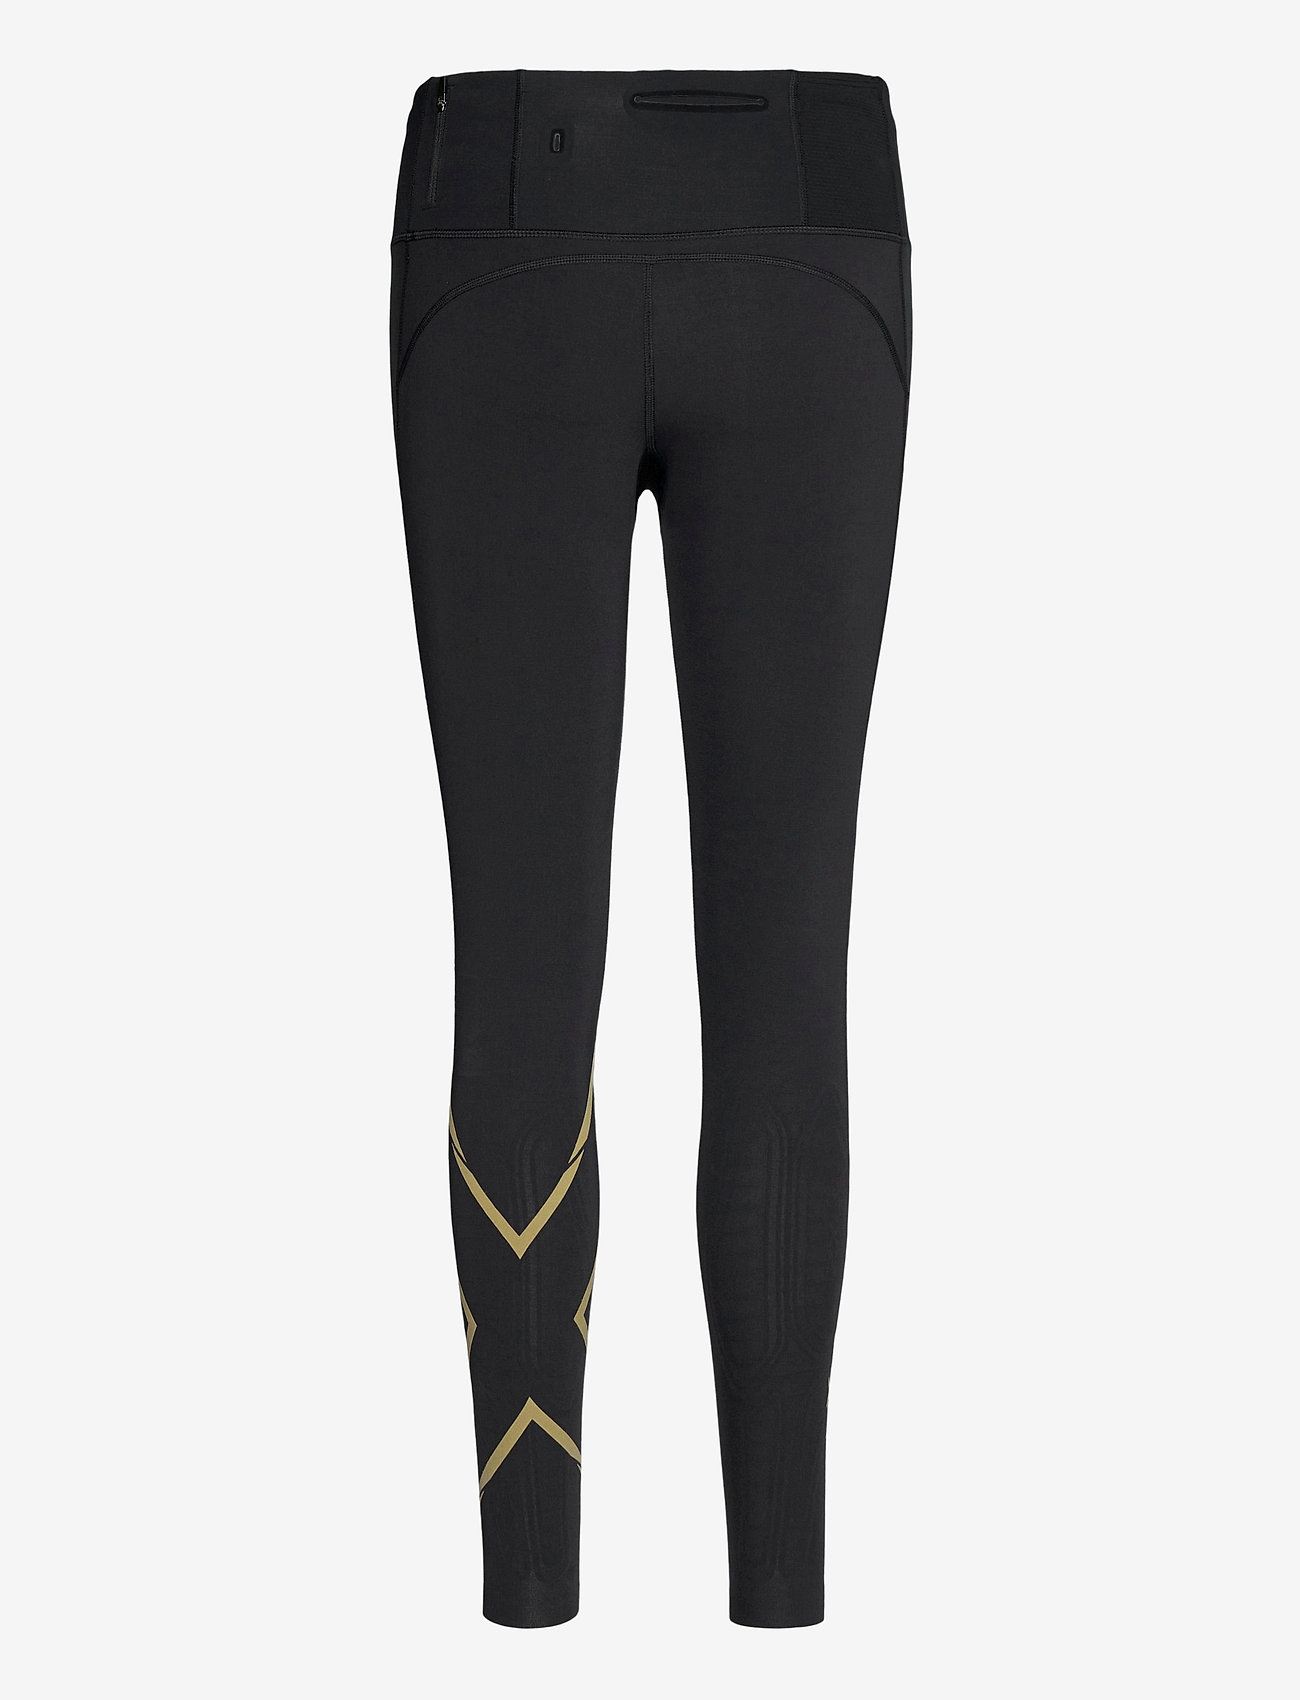 2XU - LGT SPEED MID-RISE COMP TIGHT - sportleggings - black/gold reflective - 1